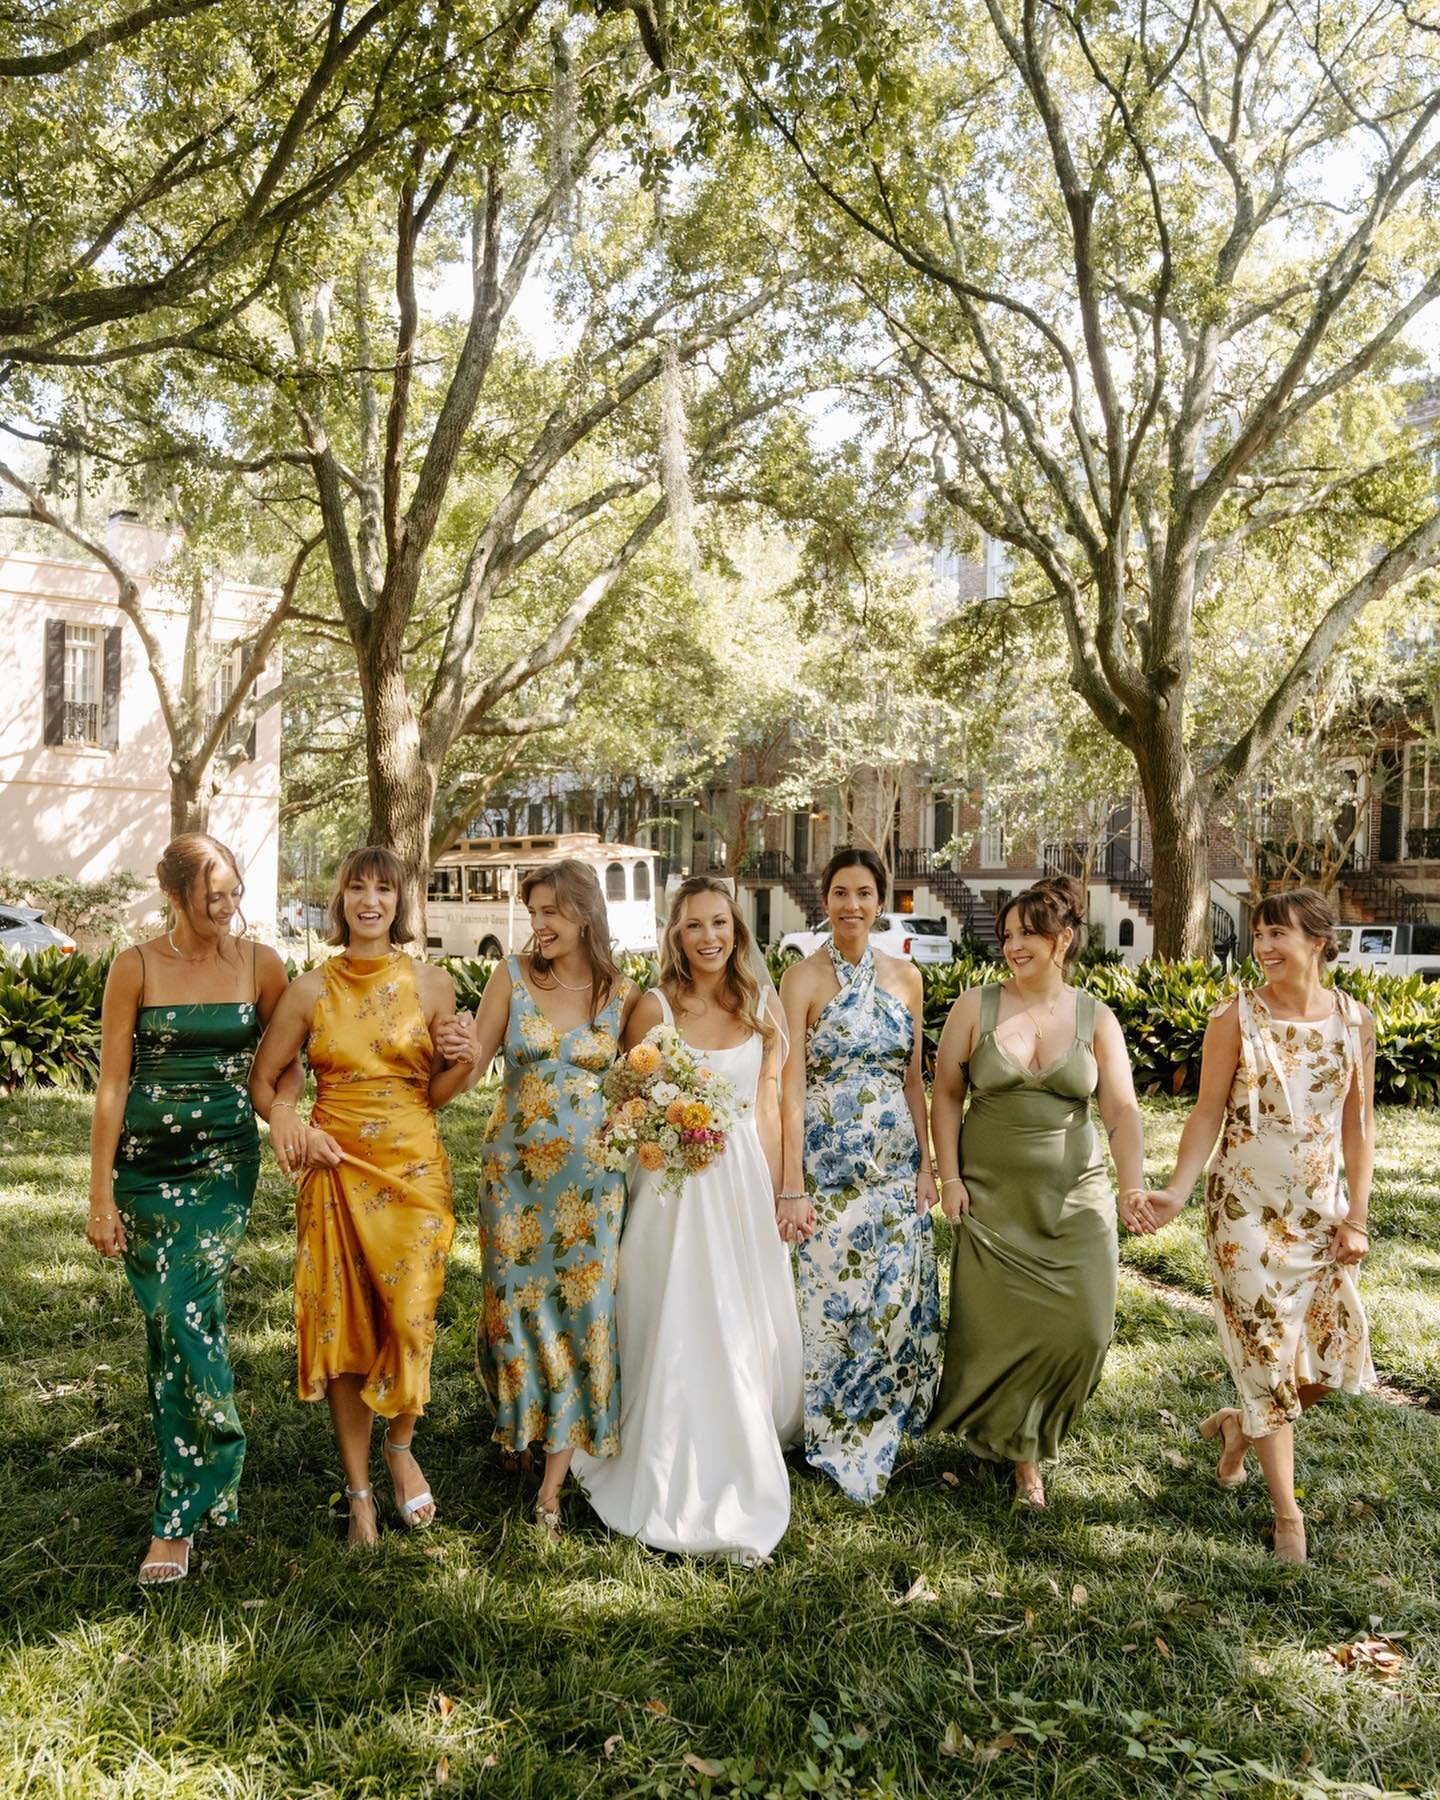 Are we loving the mismatched bridesmaid&rsquo;s dress theme or are we loving the mismatched bridesmaid&rsquo;s dress theme? Asking for a friend.

I love that over the years couples have gotten more and more comfortable putting their own spin on weddi